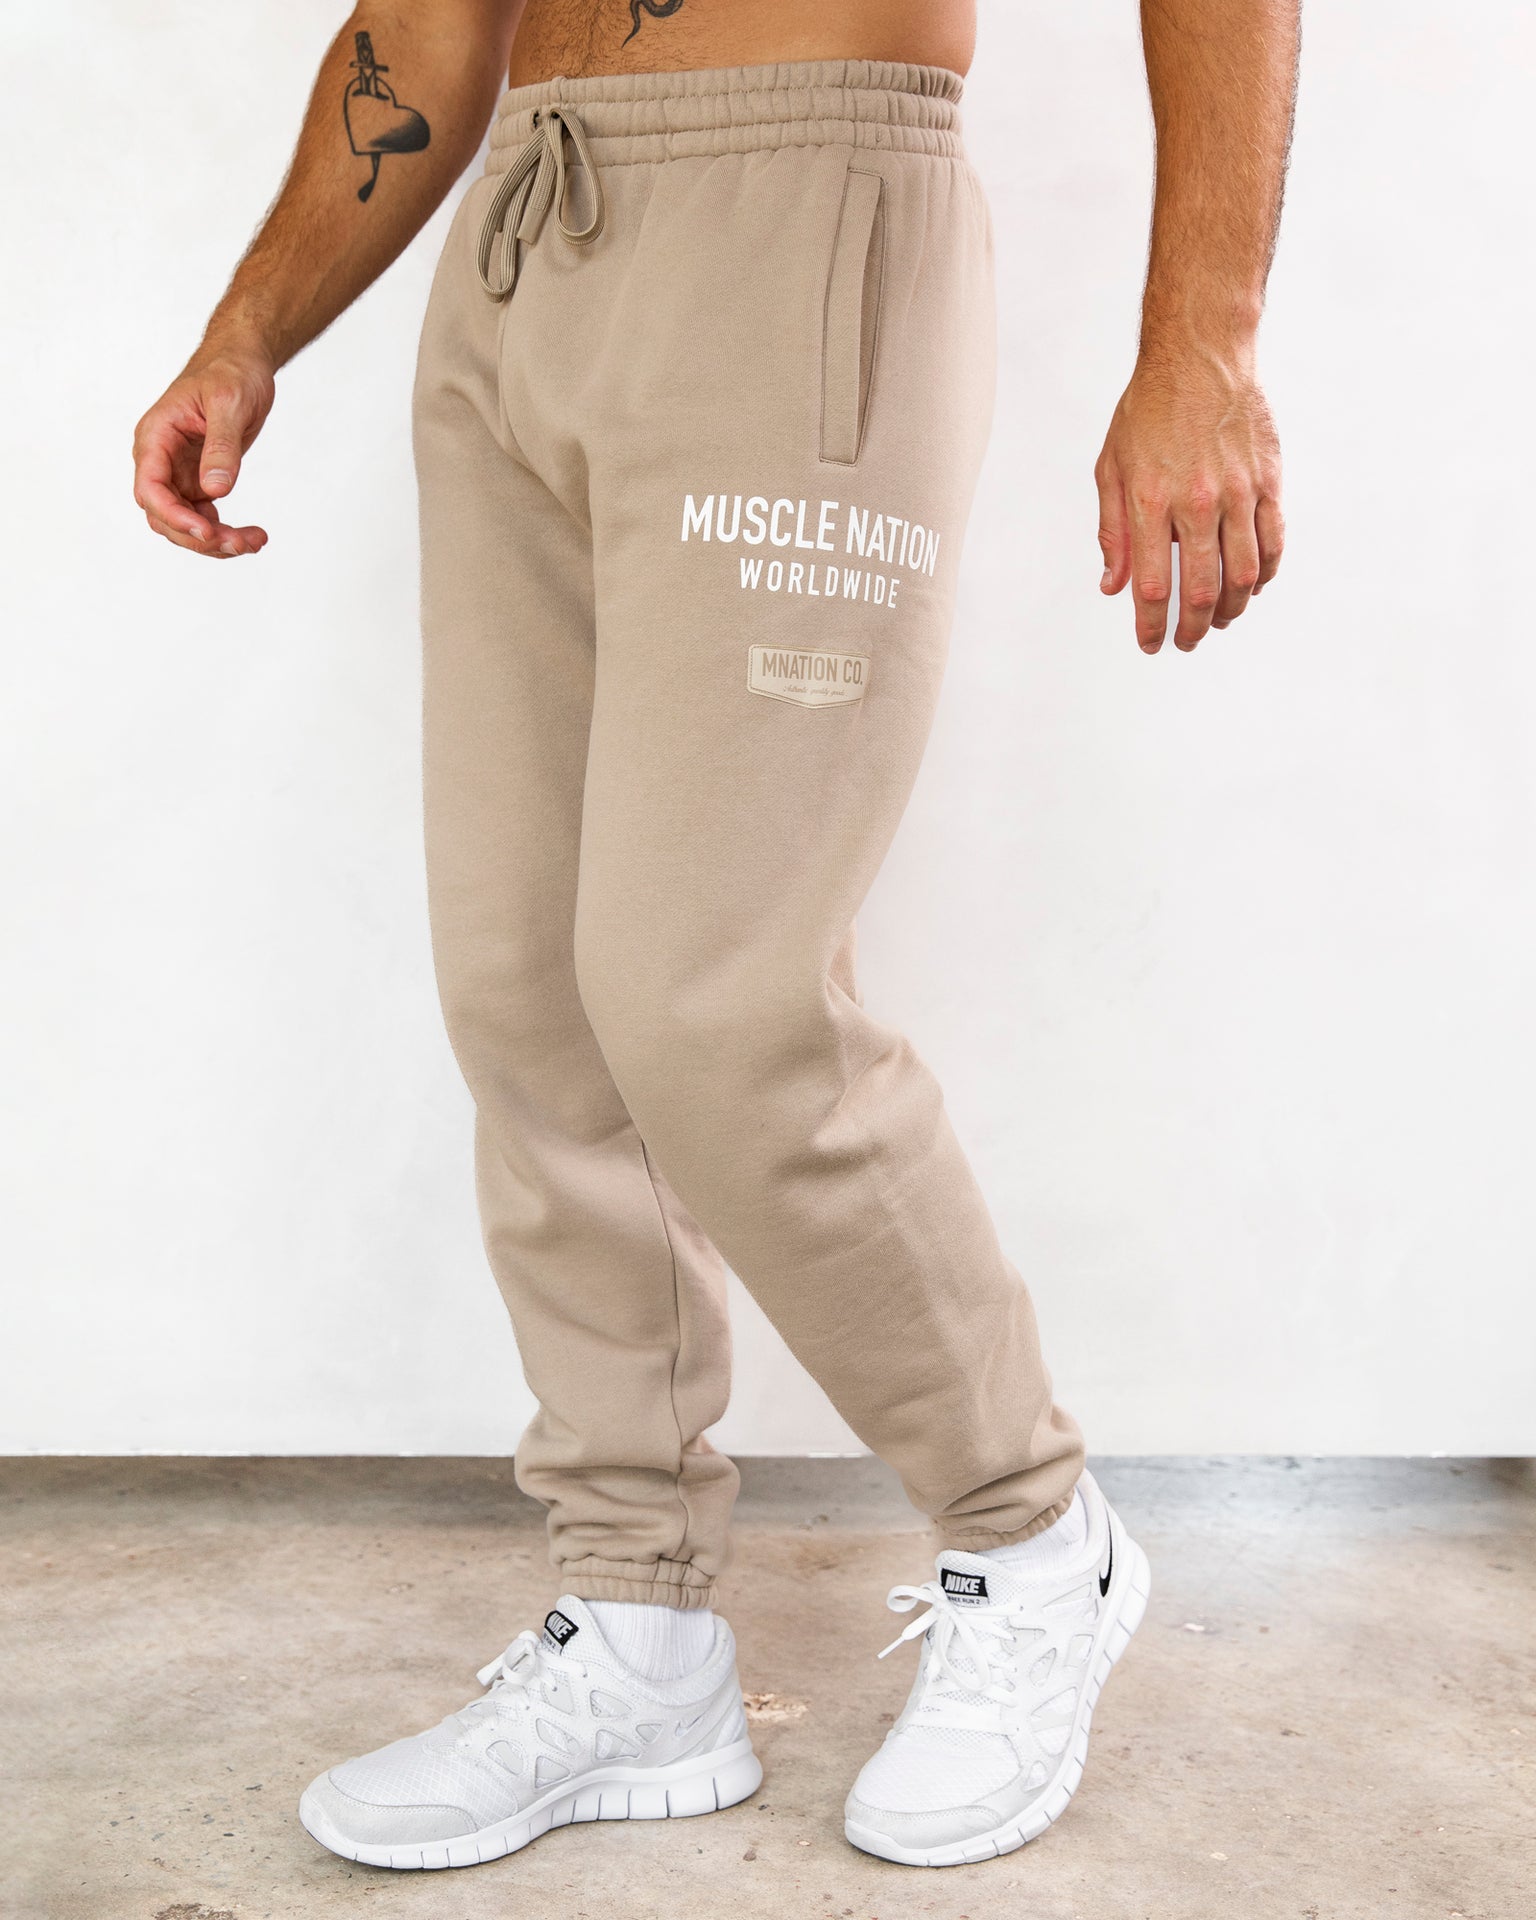 Muscle Nation Men's Track Pants Worldwide Trackies - Fossil